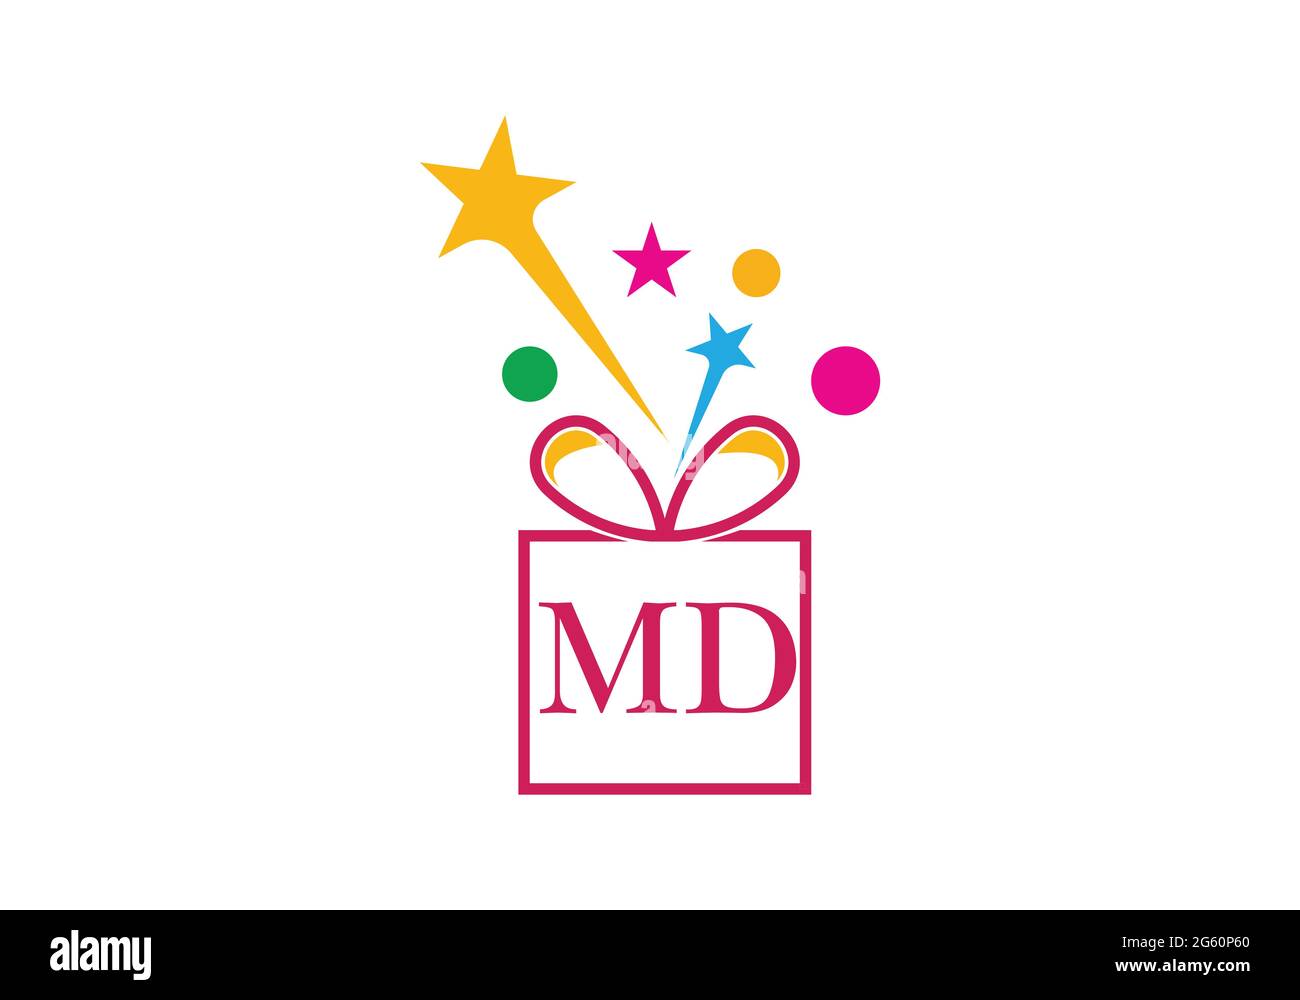 Gift Box, gift shop letter alphabet M D logo icon for Luxury brand design for wedding invitations, greeting card, logo, and other design. Stock Vector